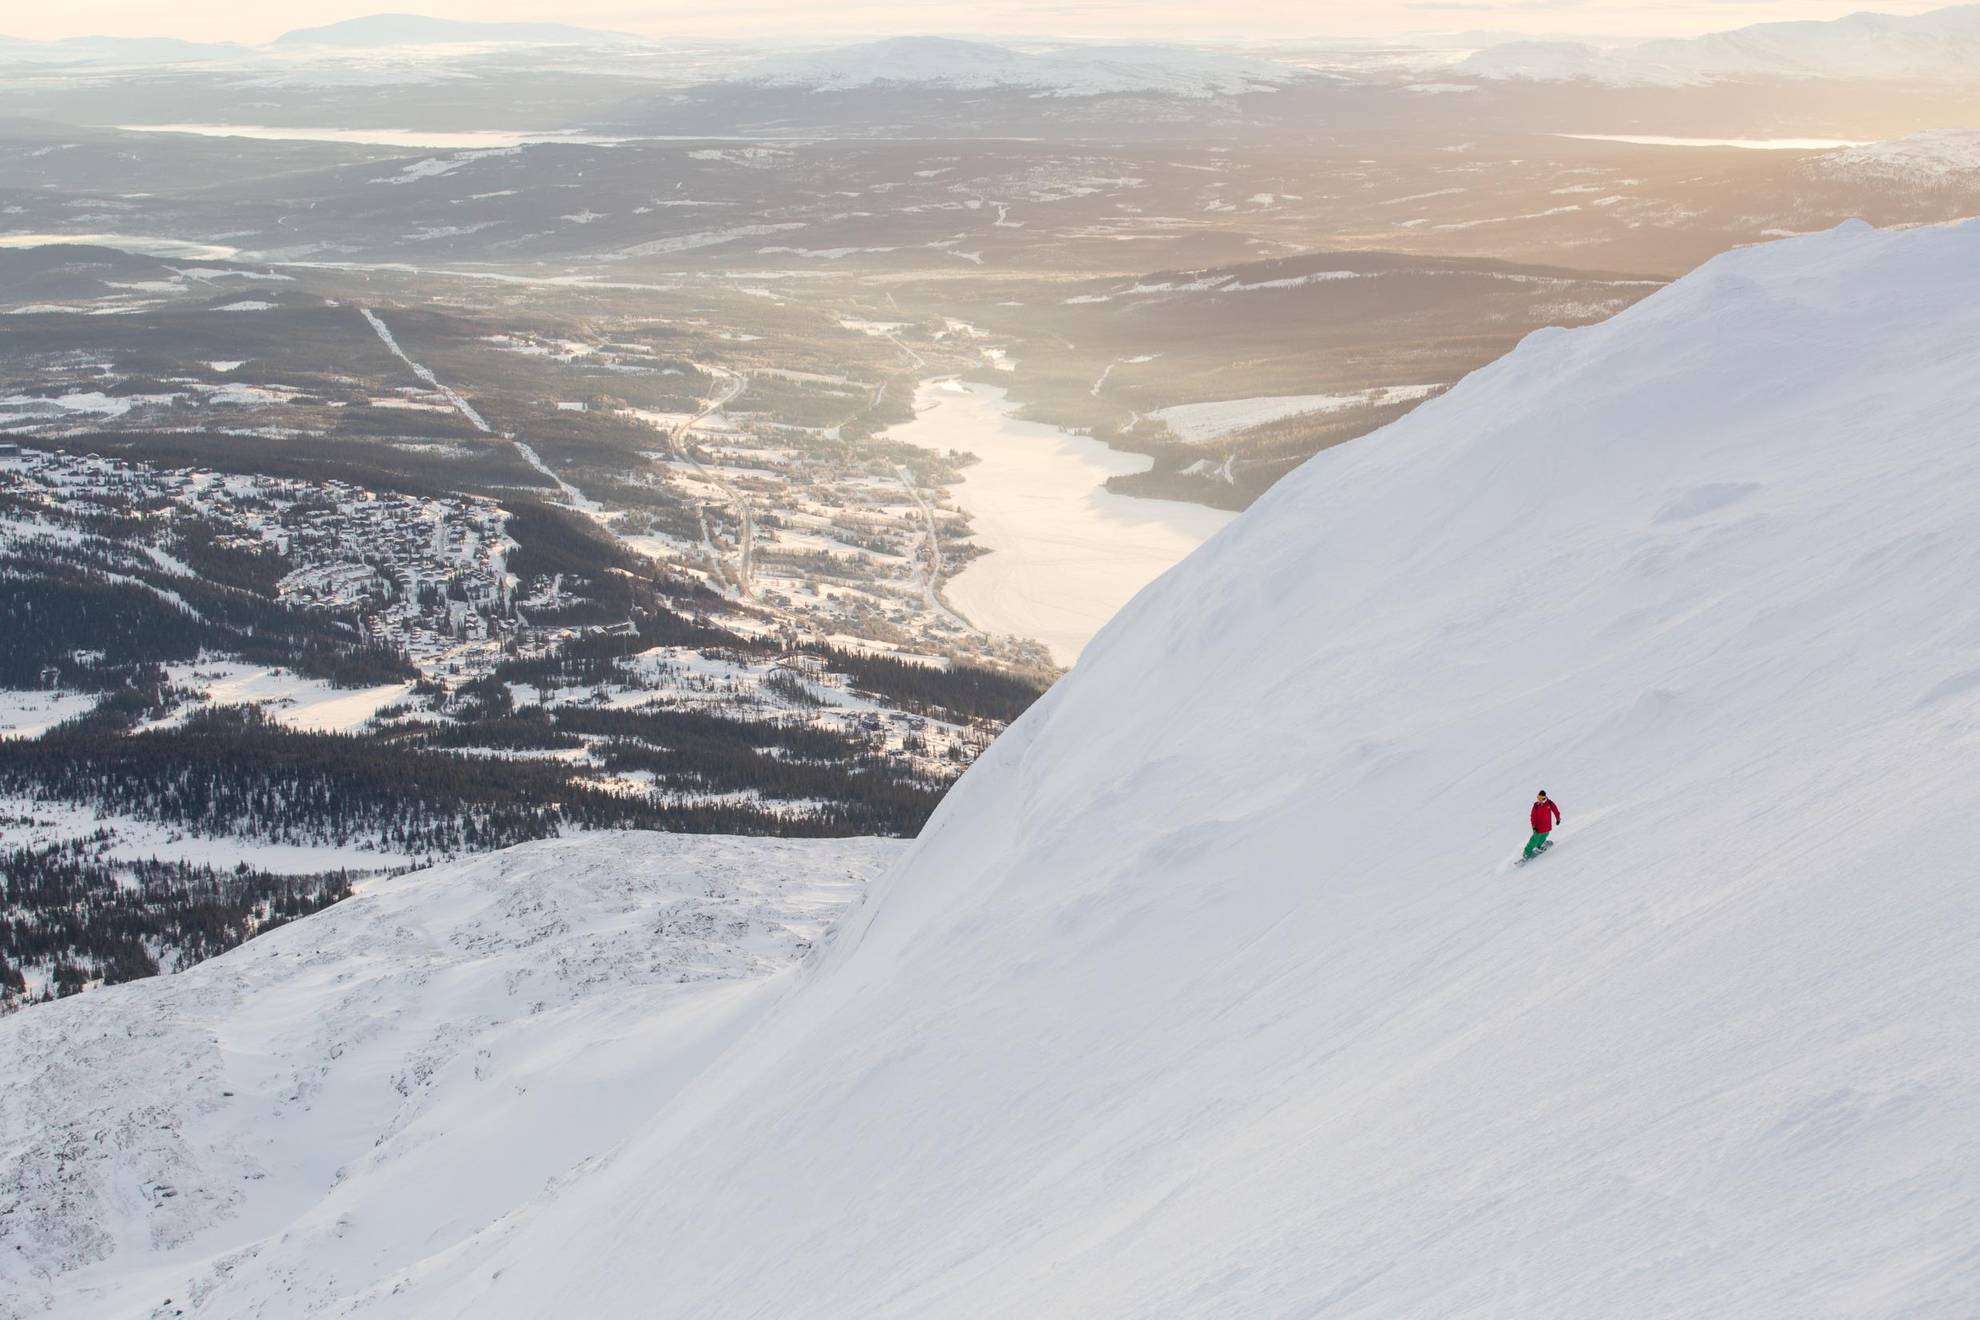 A scenic view of the Åre valley and a river seen from one of the peaks. A person skis down the slope.